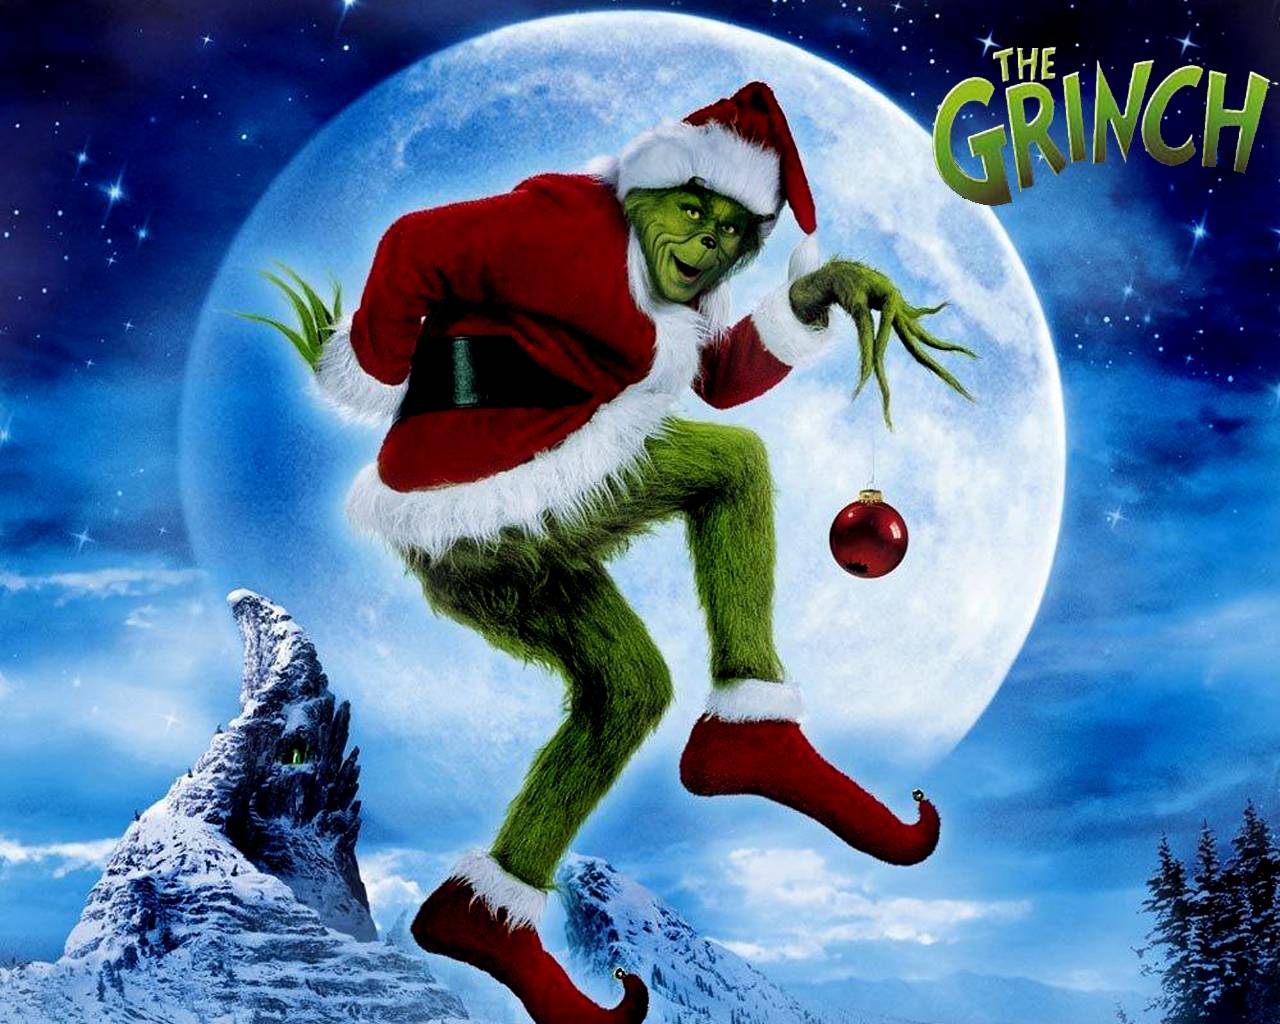 How the Grinch Stole Christmas Wallpaper. Grinch Cartoon Wallpaper, Grinch Wallpaper and How the Grinch Stole Christmas Wallpaper